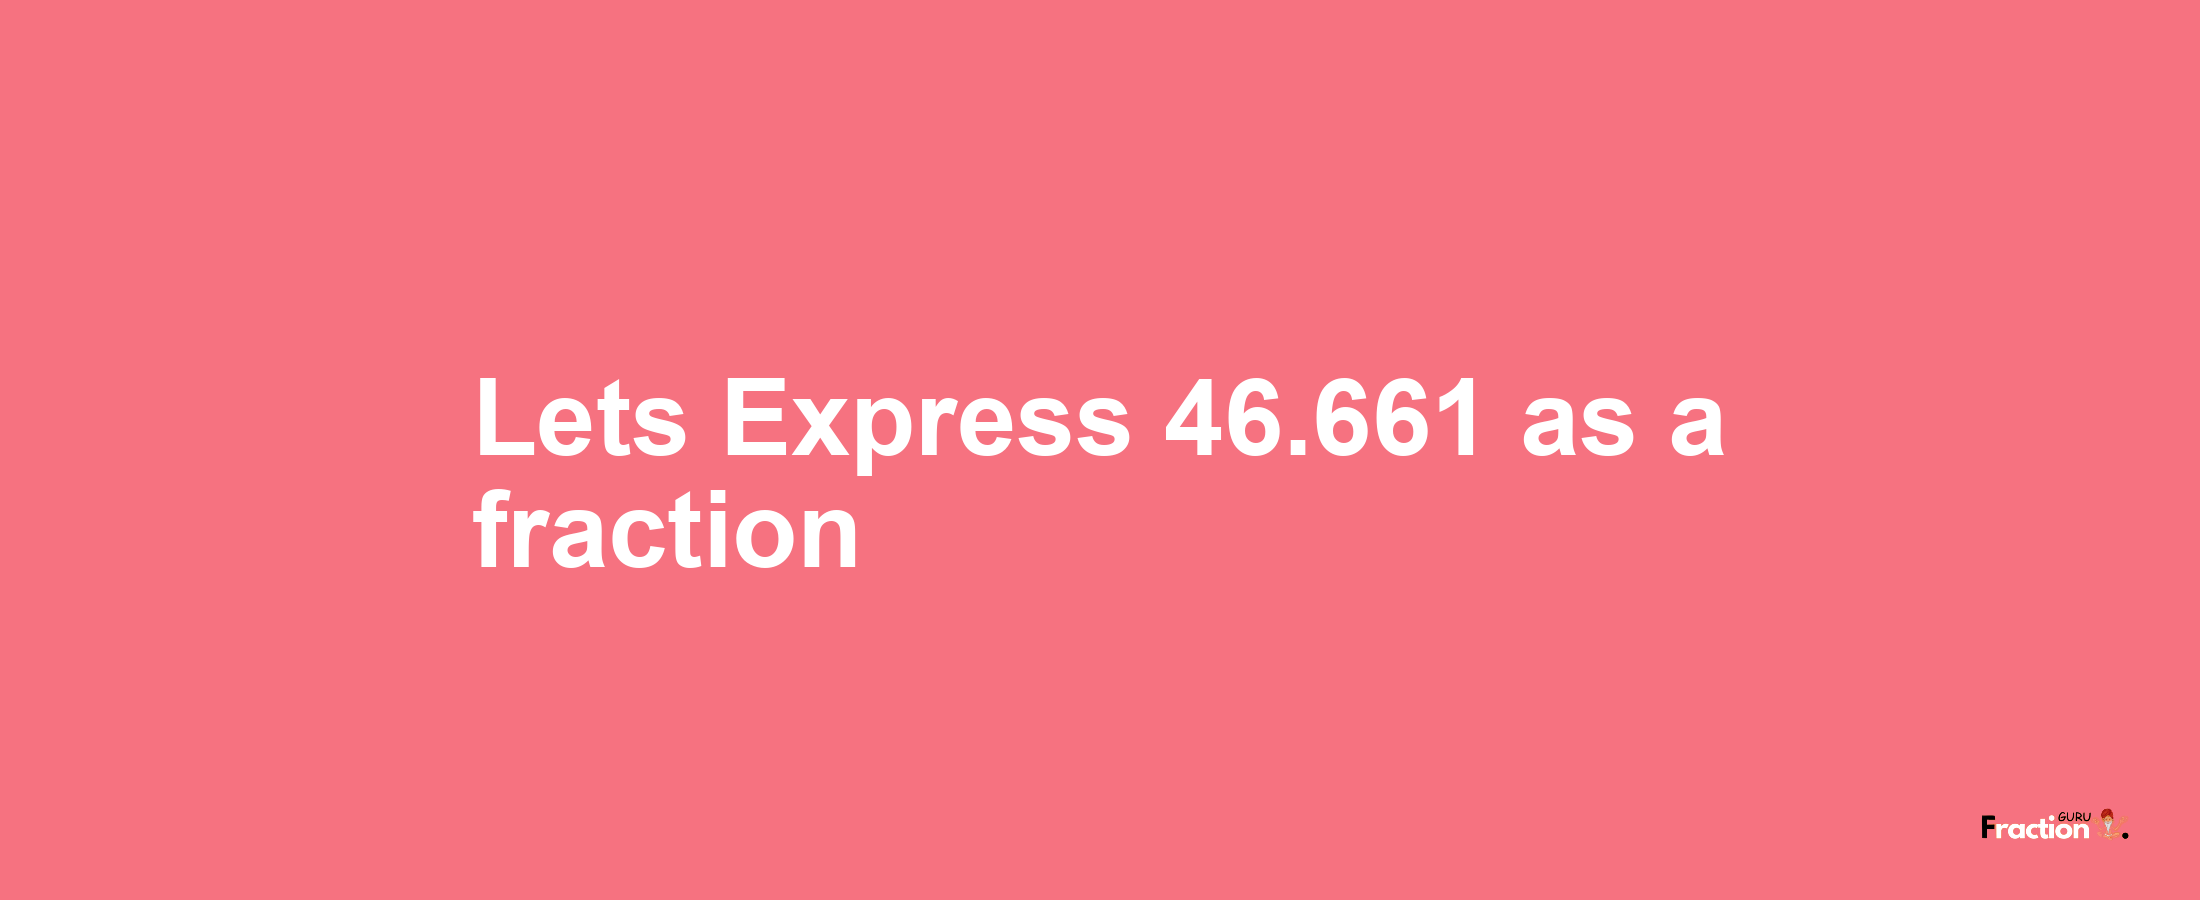 Lets Express 46.661 as afraction